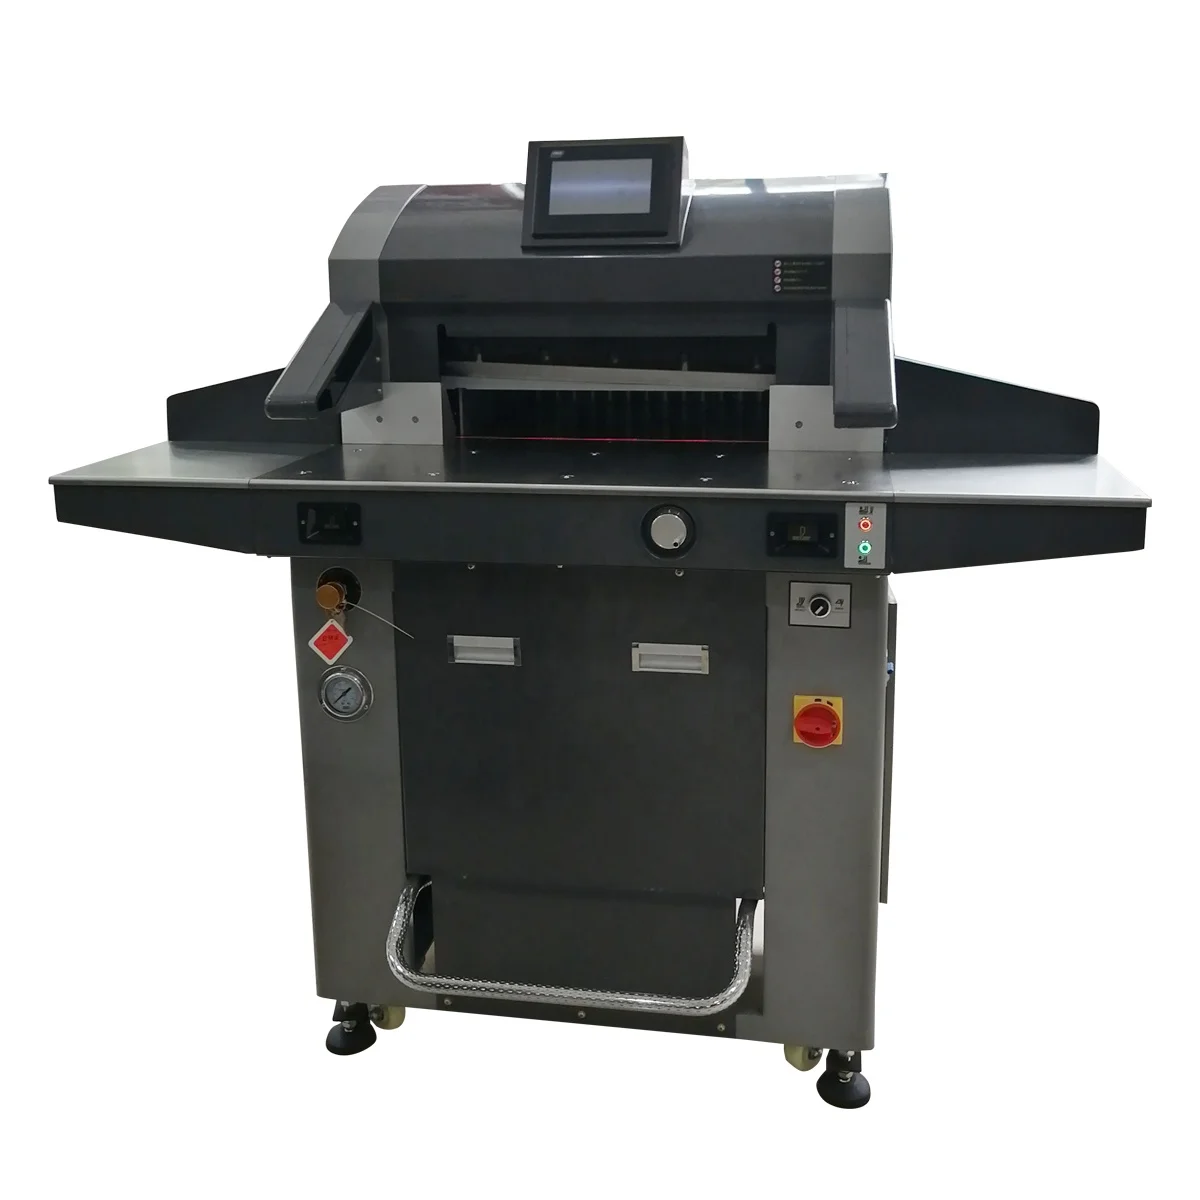 
H520S Stainless steel countertop silent hydraulic 520mm guillotine paper cutter machine with Side table  (62295818594)